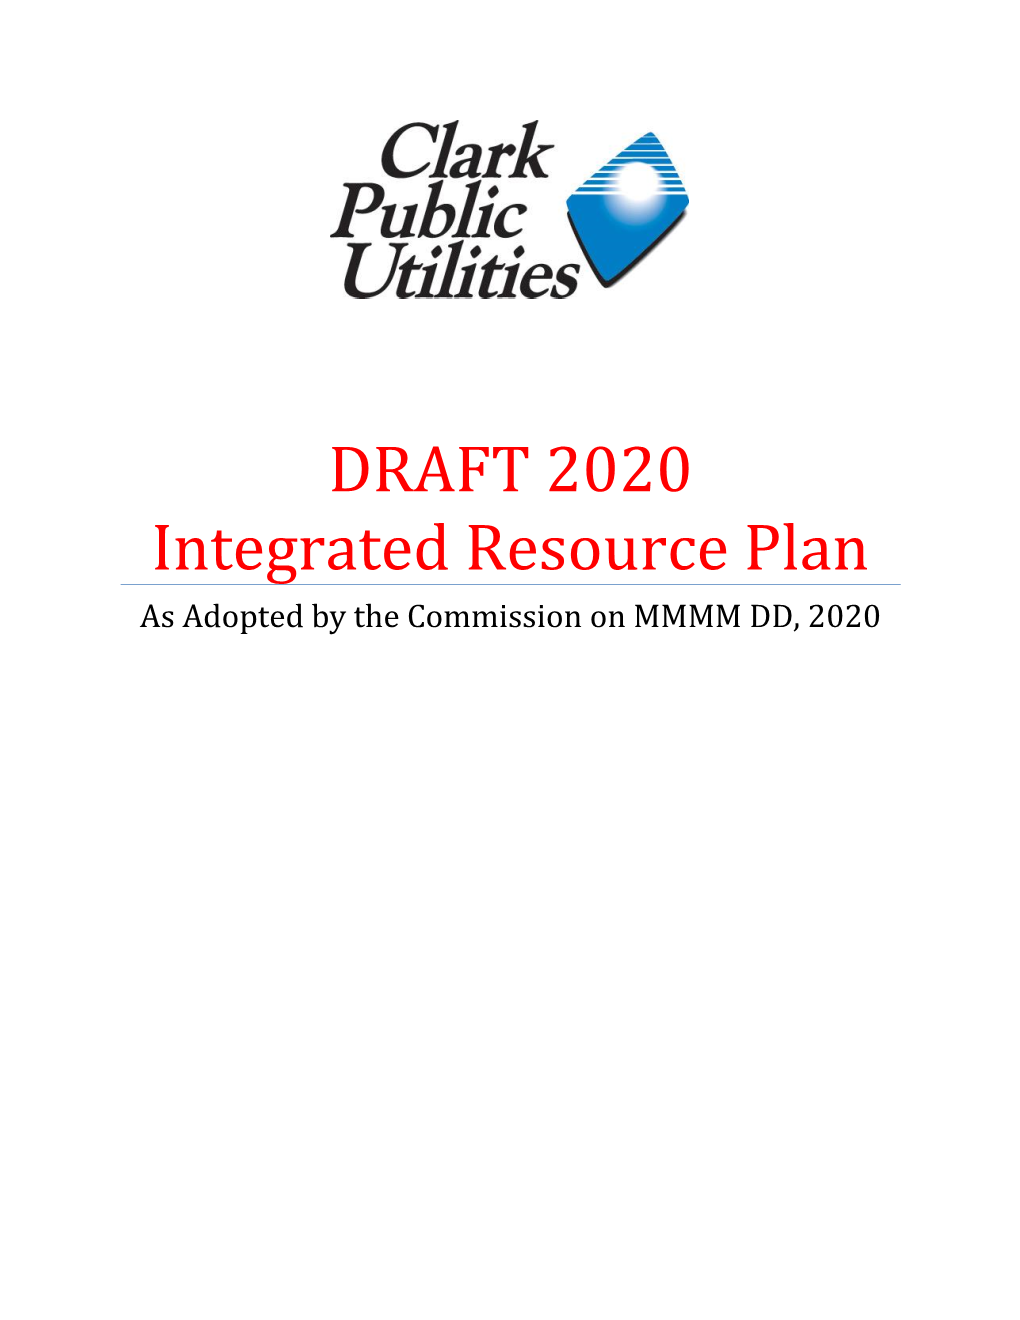 DRAFT 2020 Integrated Resource Plan As Adopted by the Commission on MMMM DD, 2020